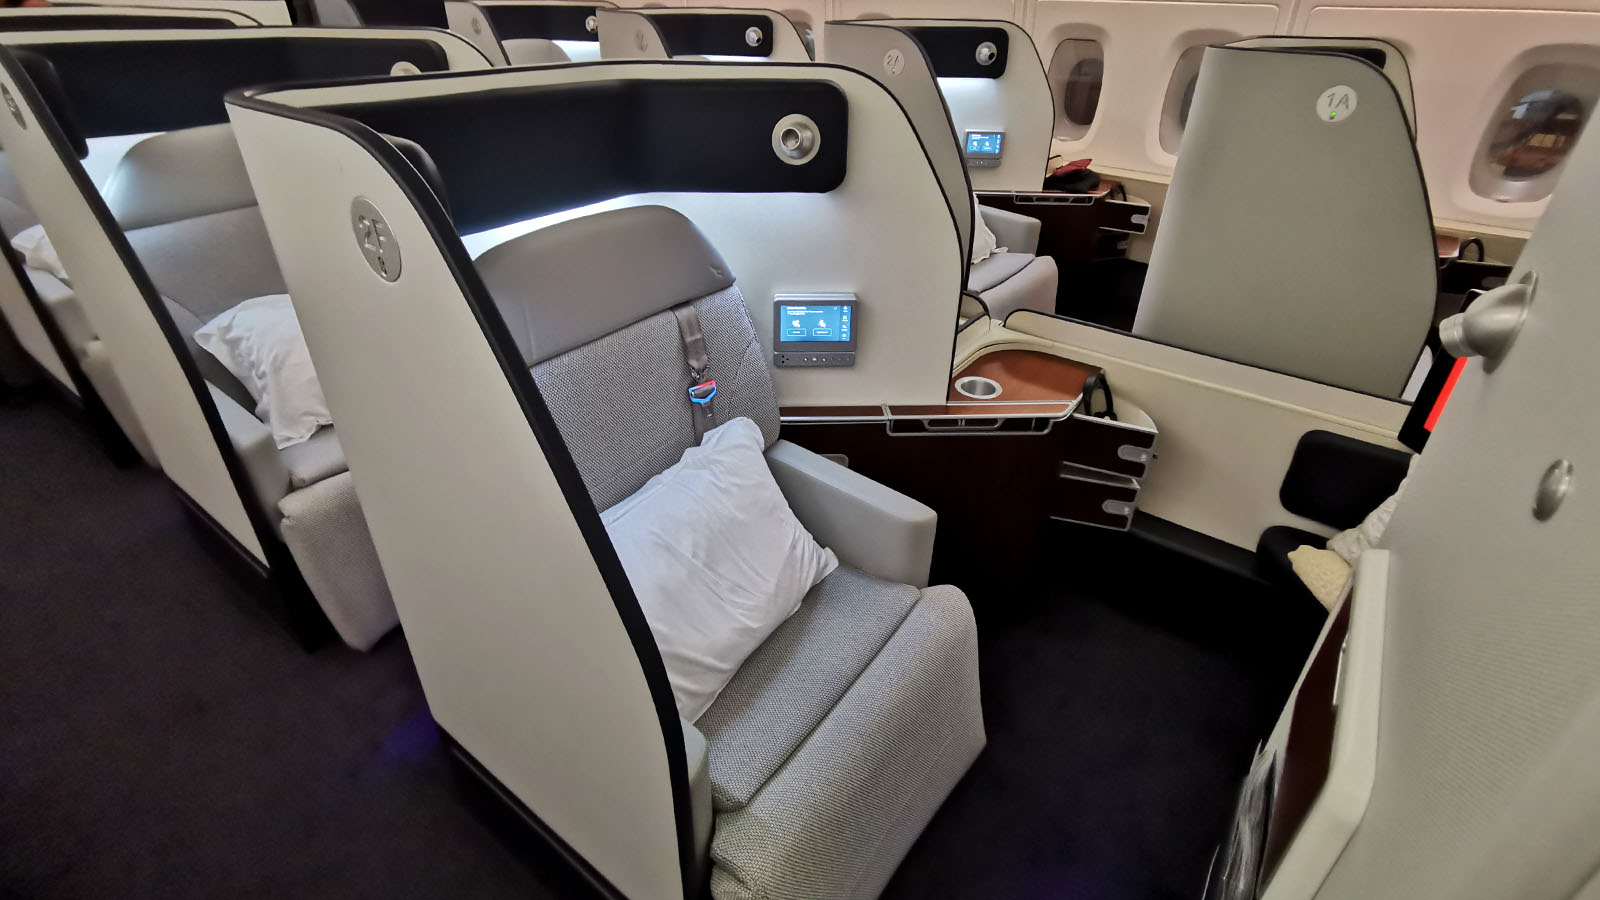 Seating in Qantas First